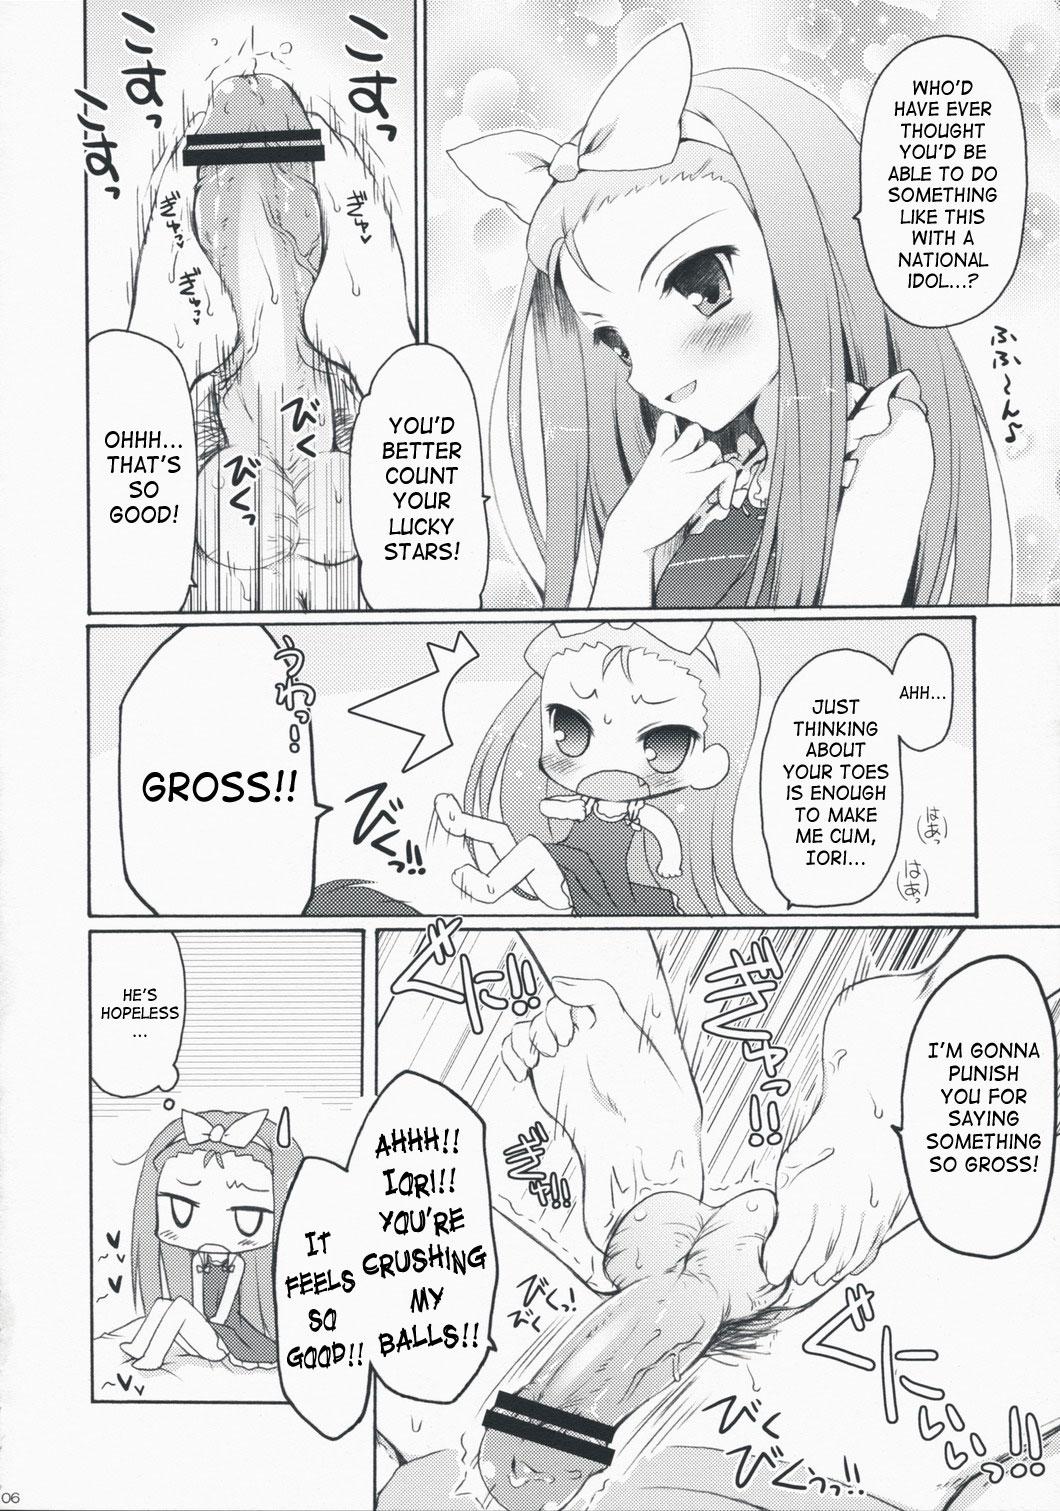 Lesbians Cranky Girl - The idolmaster Fucking Sex - Page 5